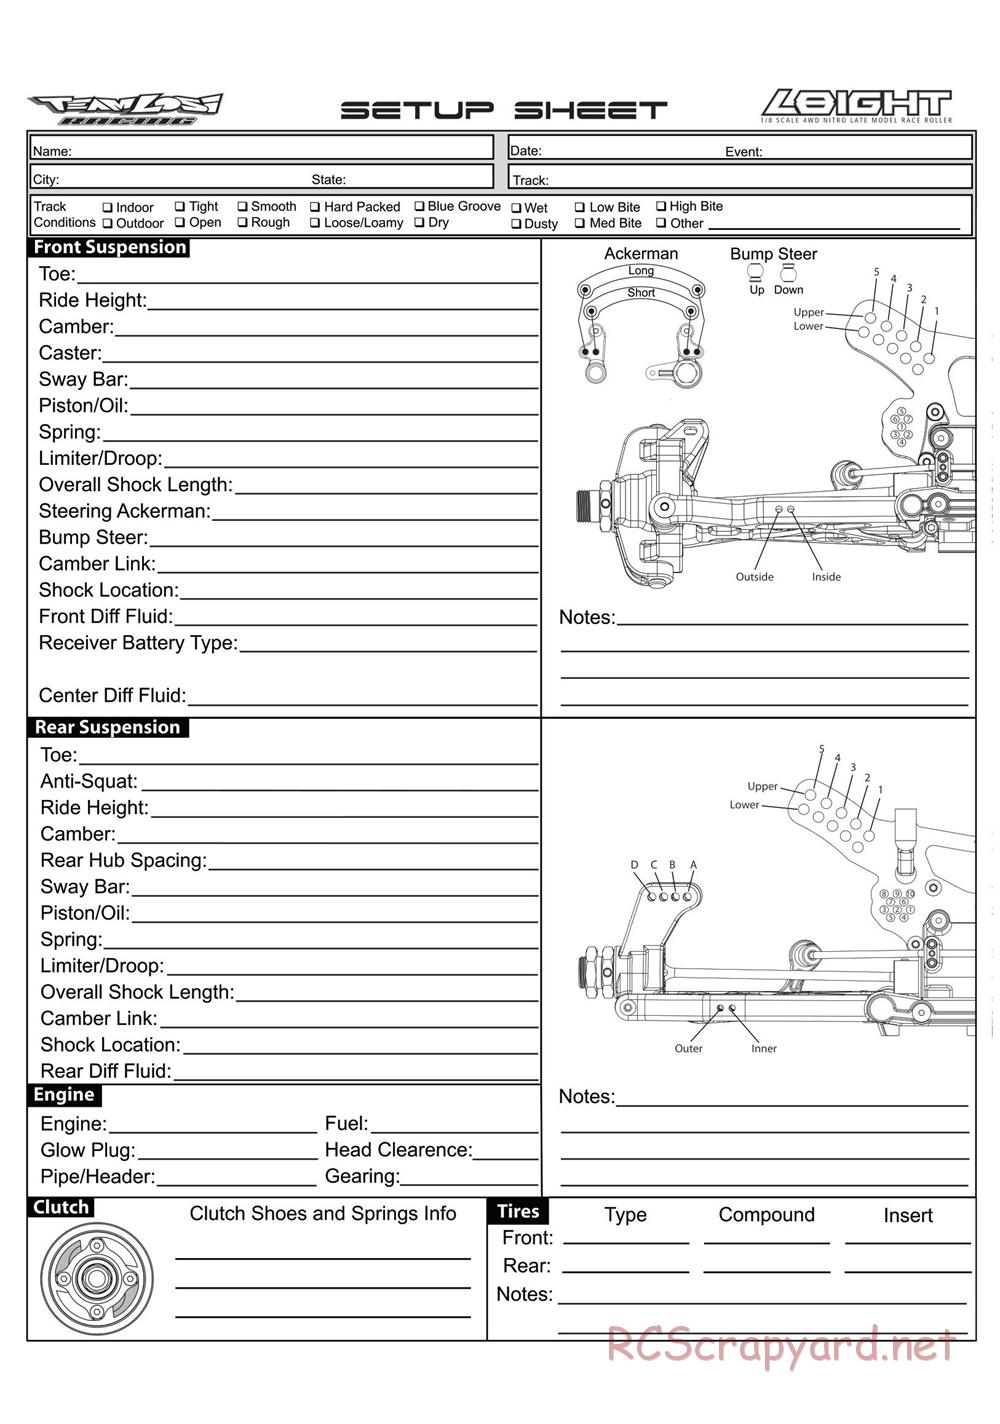 Team Losi - L8ight - Race Roller - Manual - Page 6